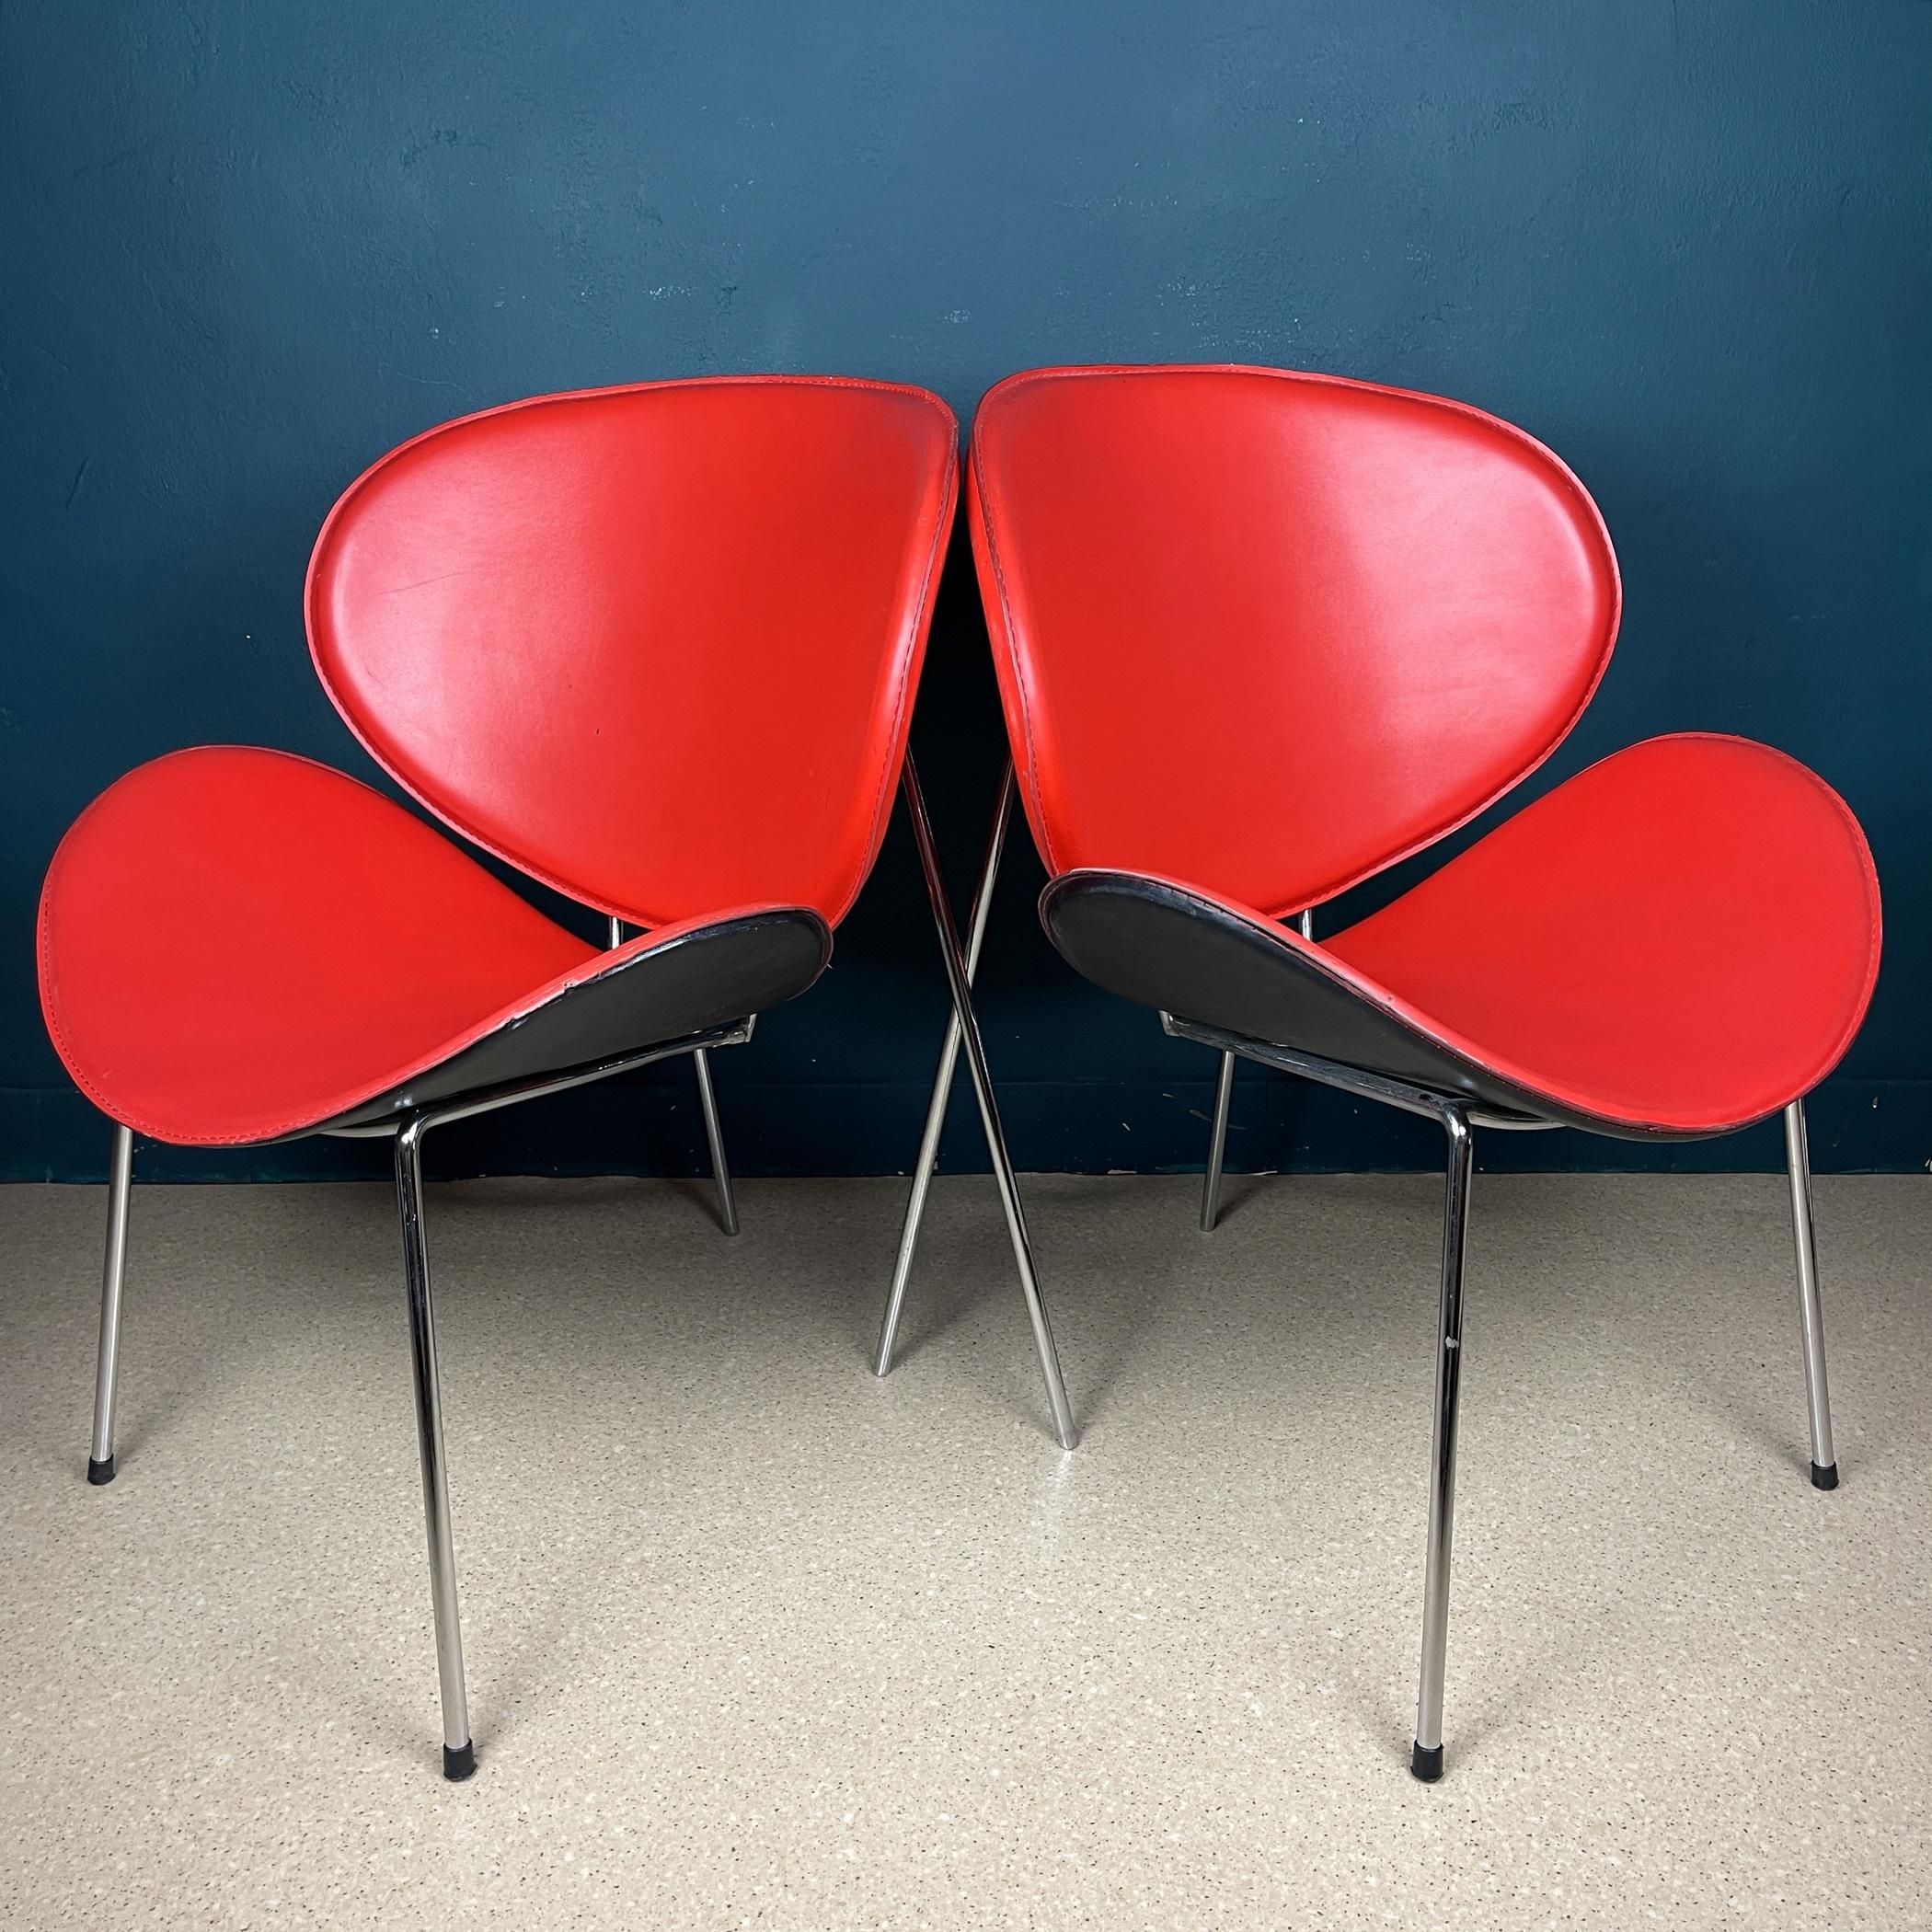 Pair of red lounge chairs Italy 1990s Design Pierre Paulin Style In Good Condition For Sale In Miklavž Pri Taboru, SI